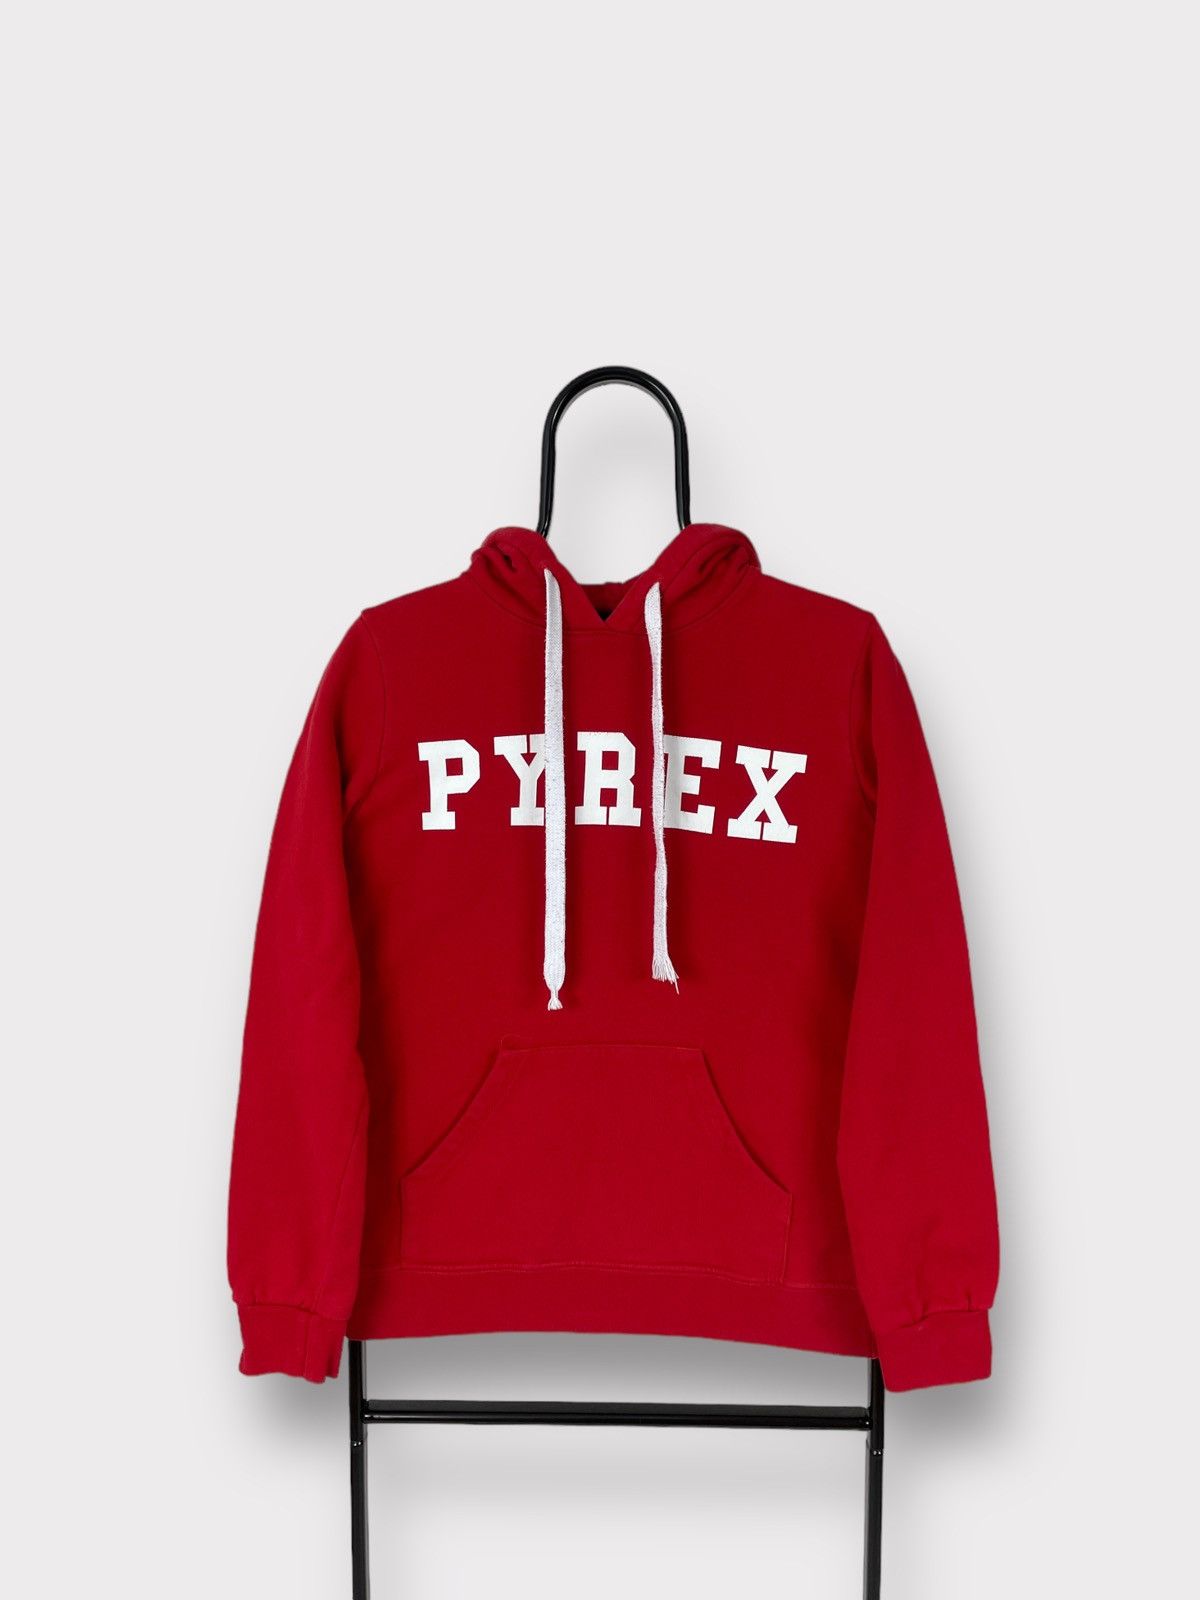 Pyrex Vision Virgil Abloh Hoodie Size-M Made in Italy